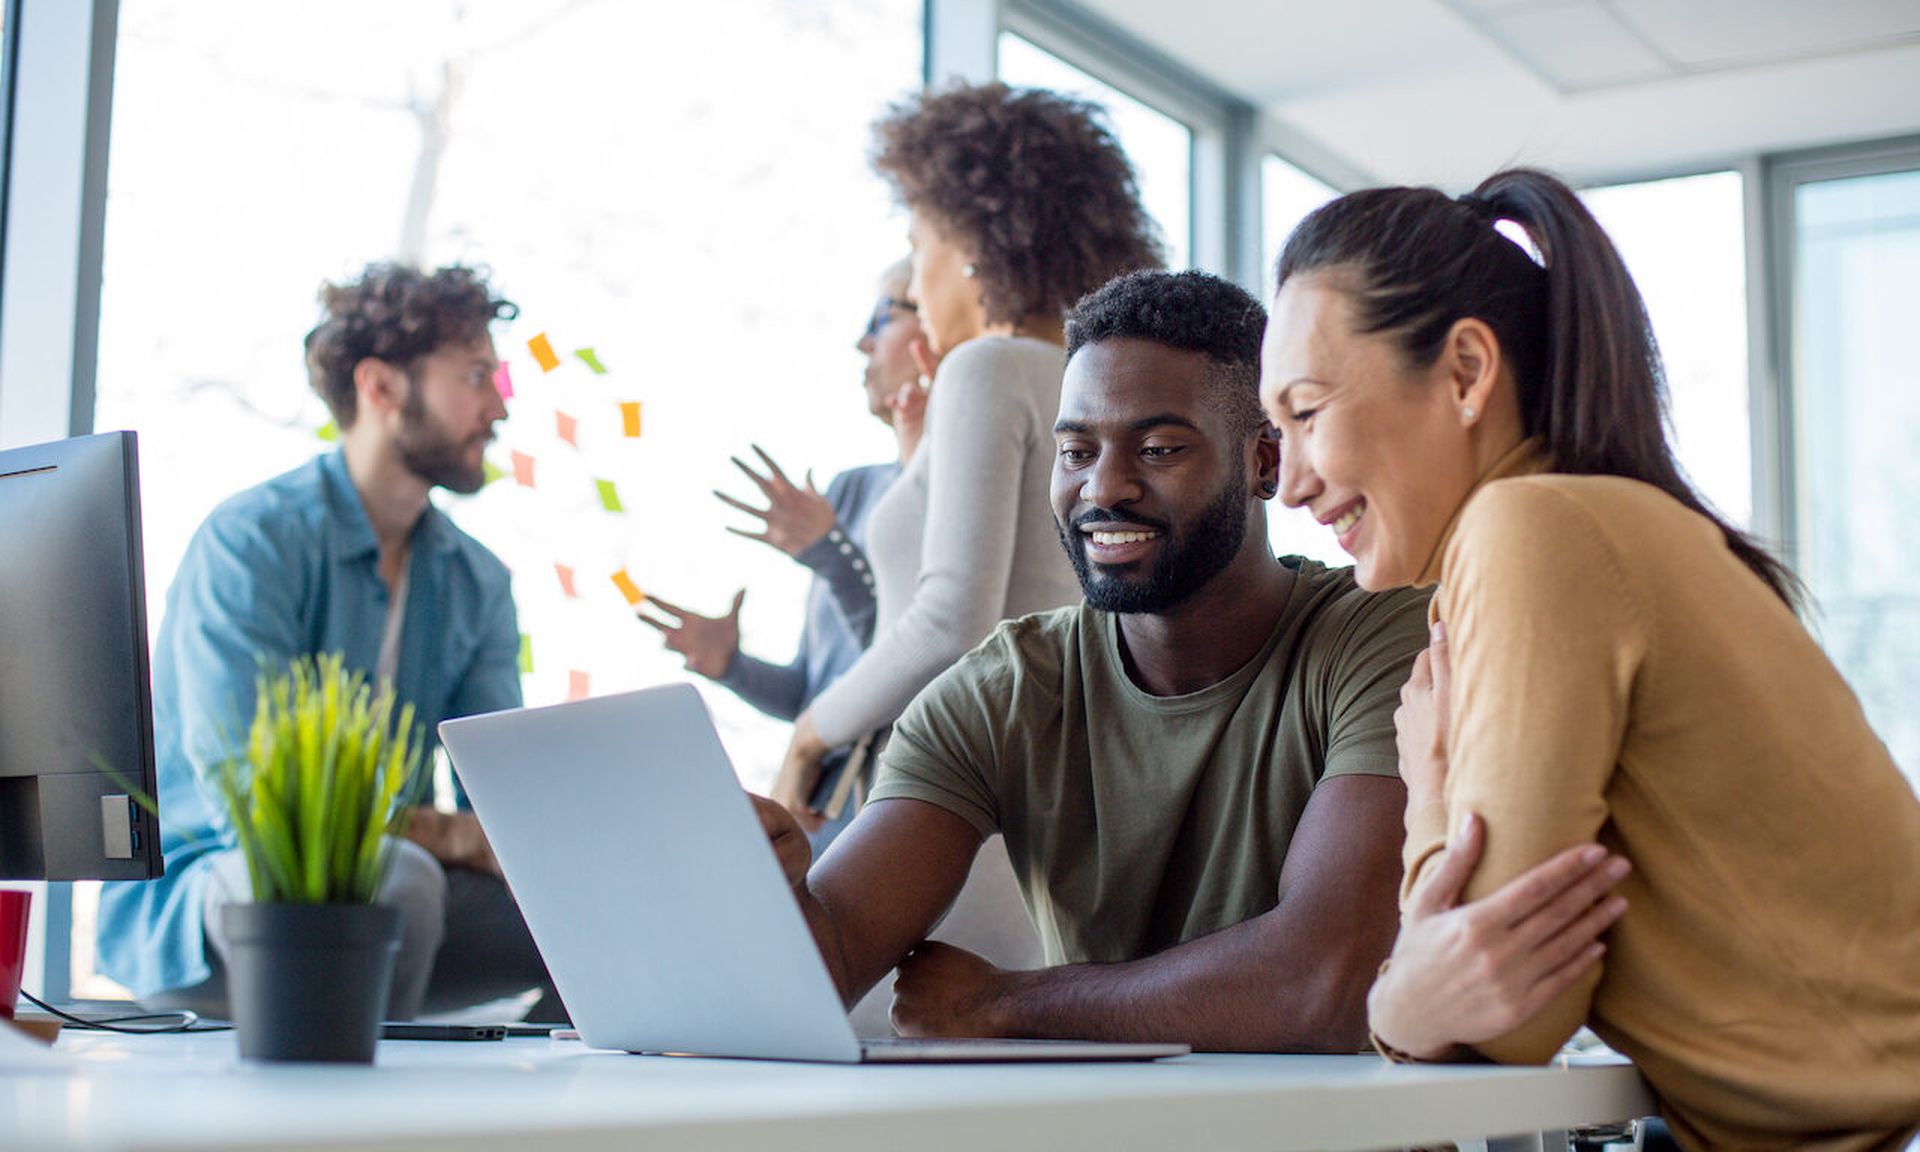 Today’s columnist, Sean Joyce of PwC, offers five ways companies can build more diverse cybersecurity teams. (Credit: Stock Photo, Getty Images)